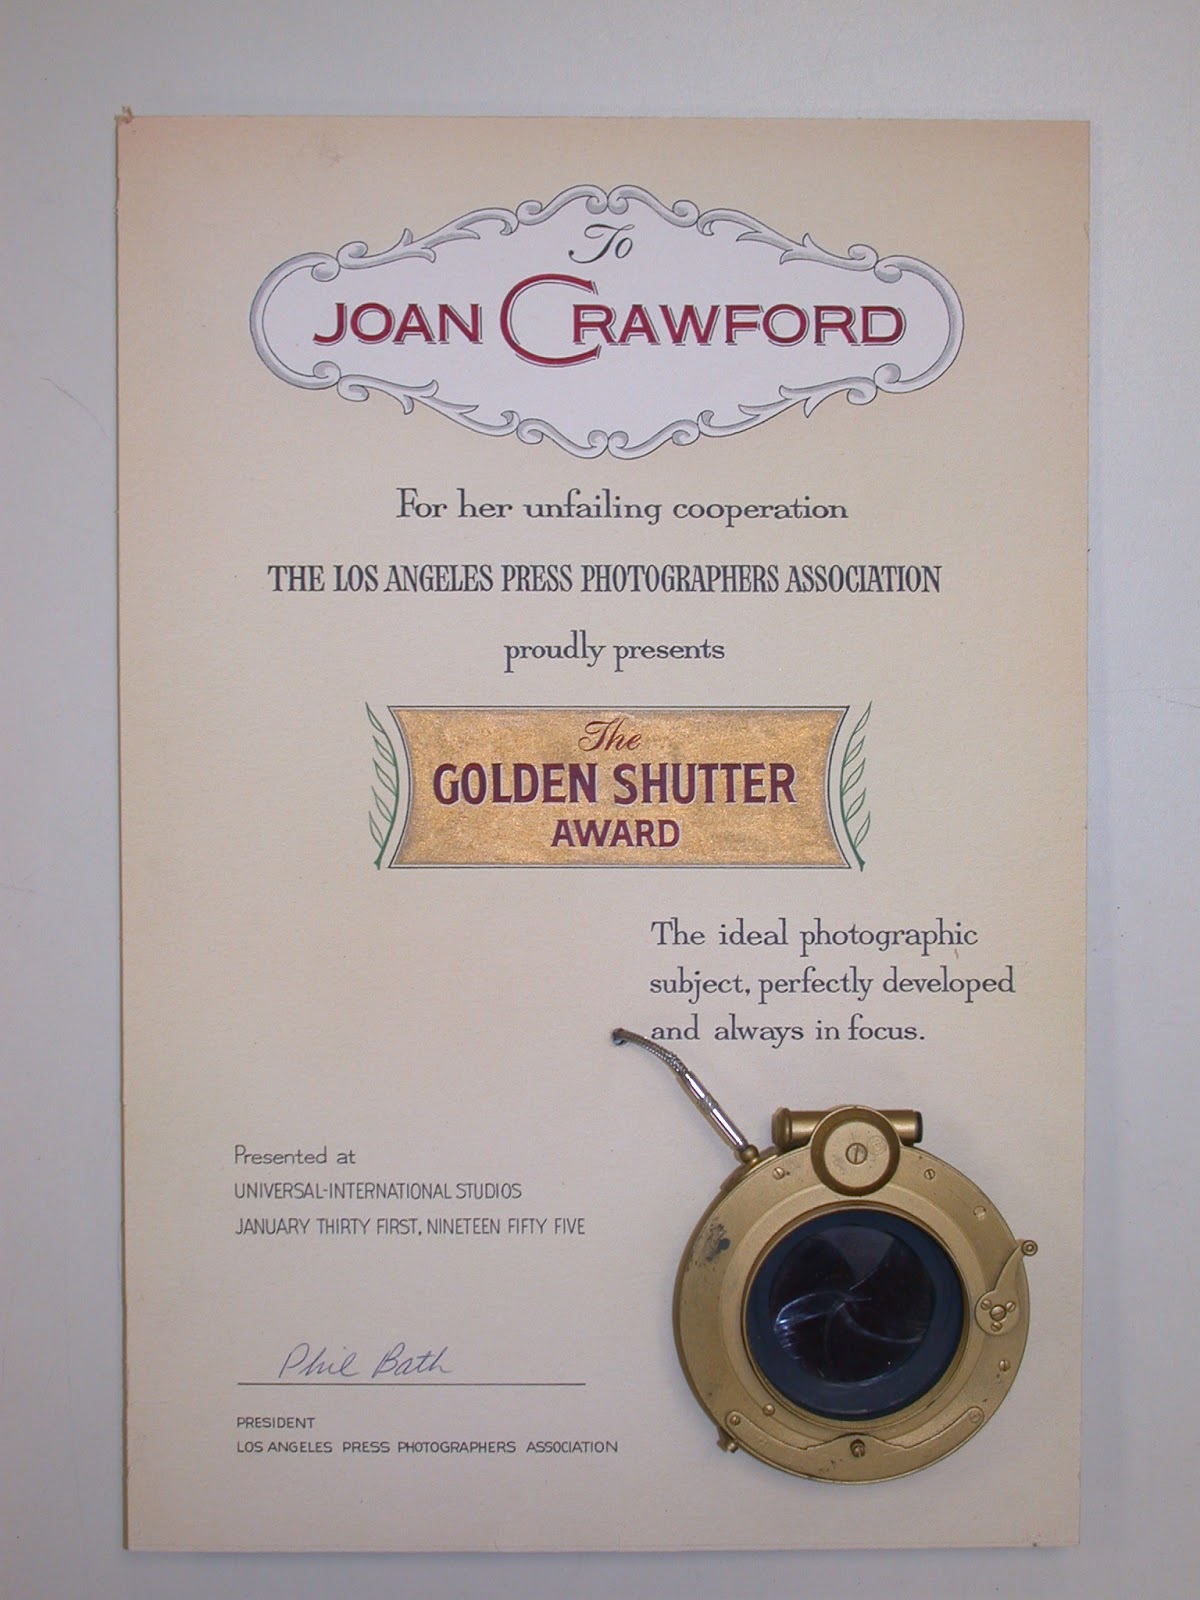 Golden Shutter Award presented to Joan Crawford by the Los Angeles Press Photographers Association